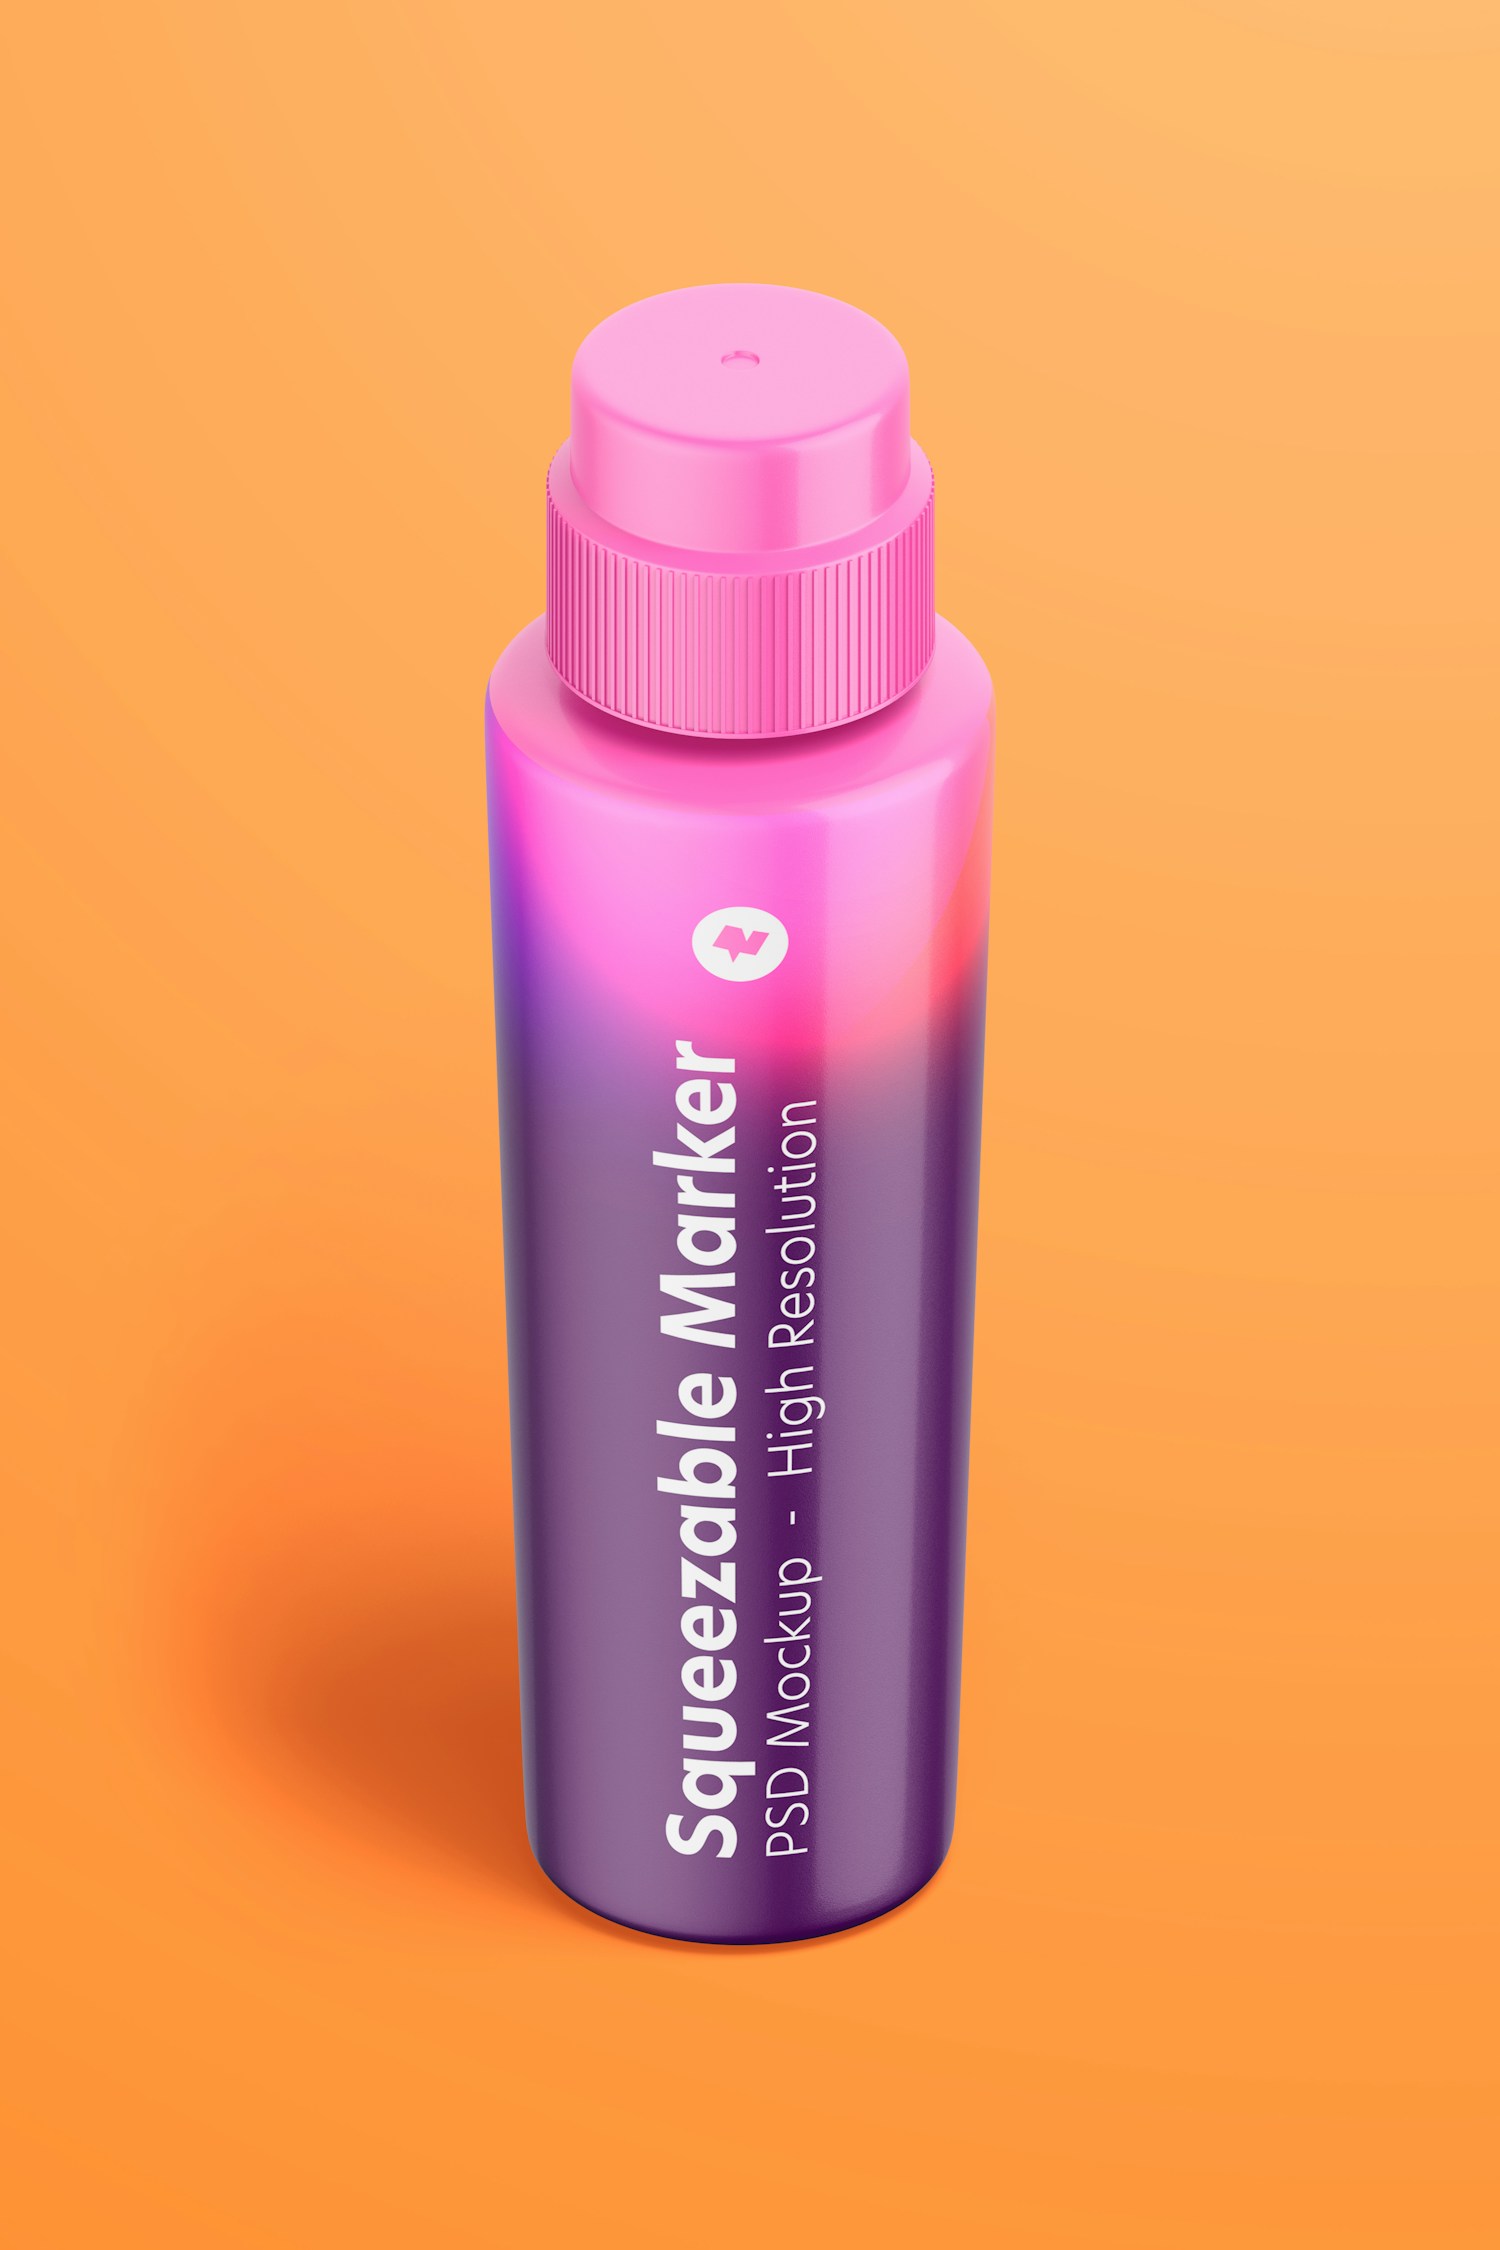 Squeezable Marker Mockup, Isometric View